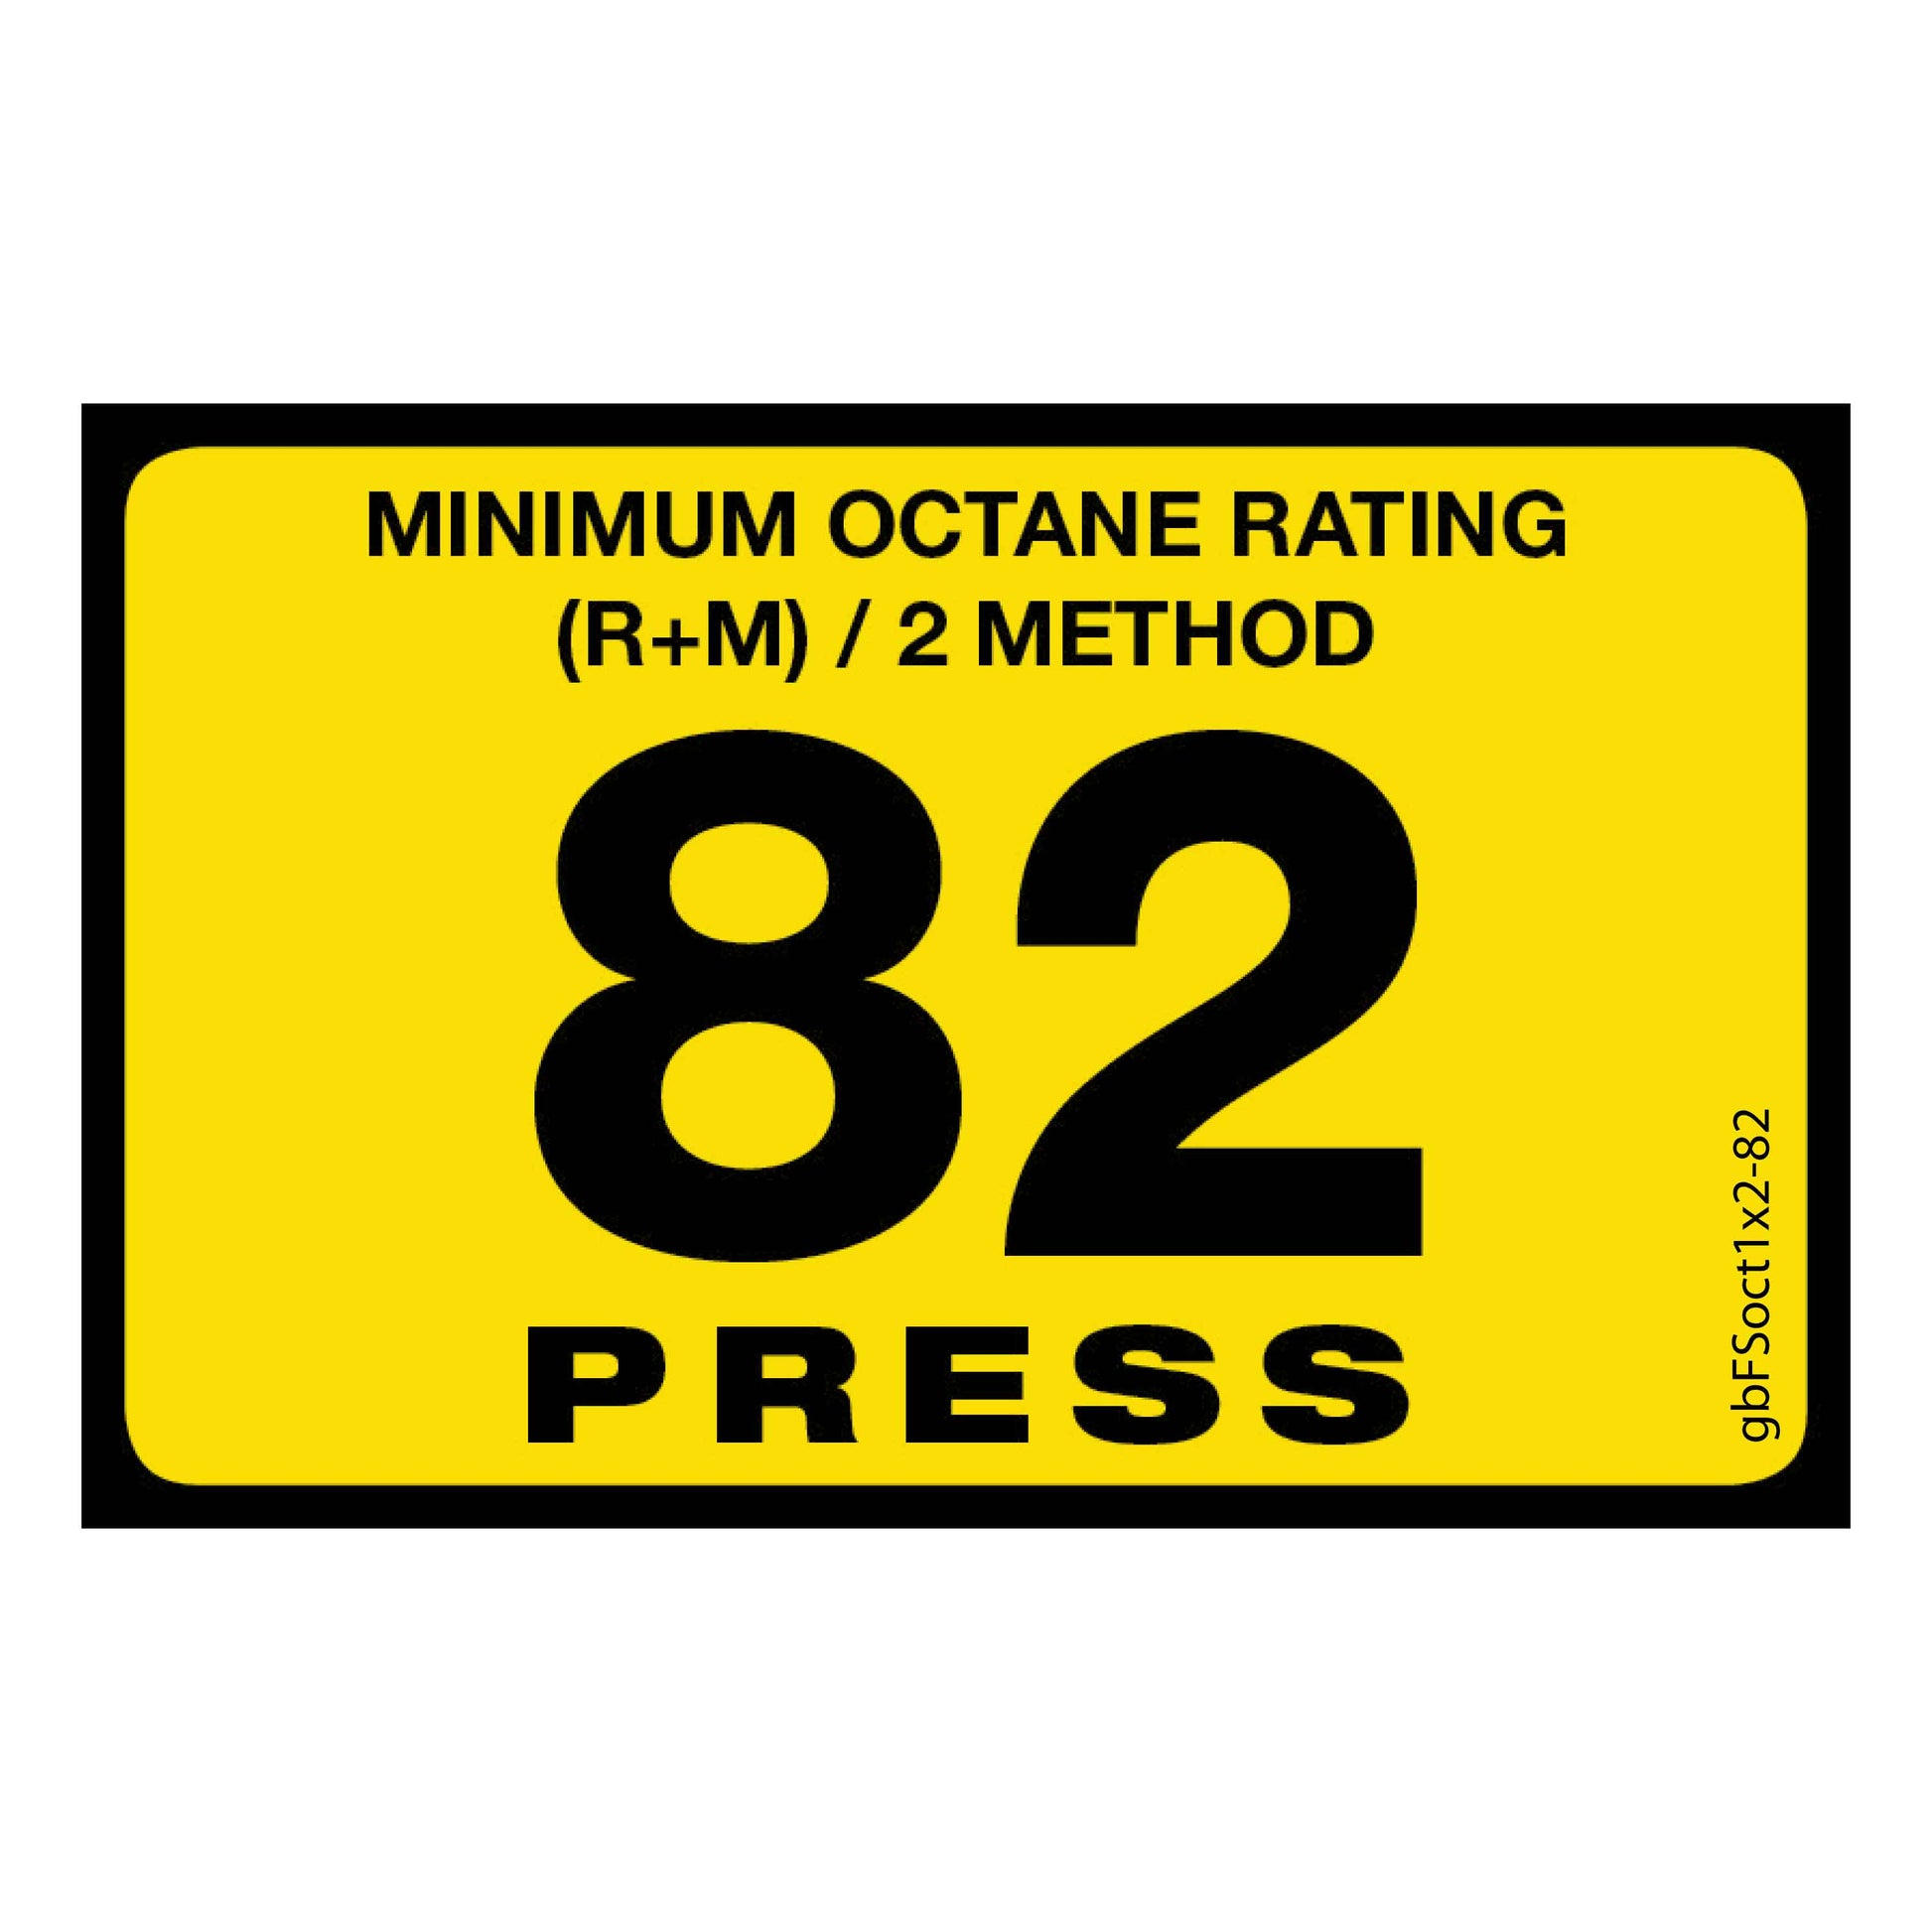 82 Press Octane Rating Decal. 1 inch by 2 inches in size. 